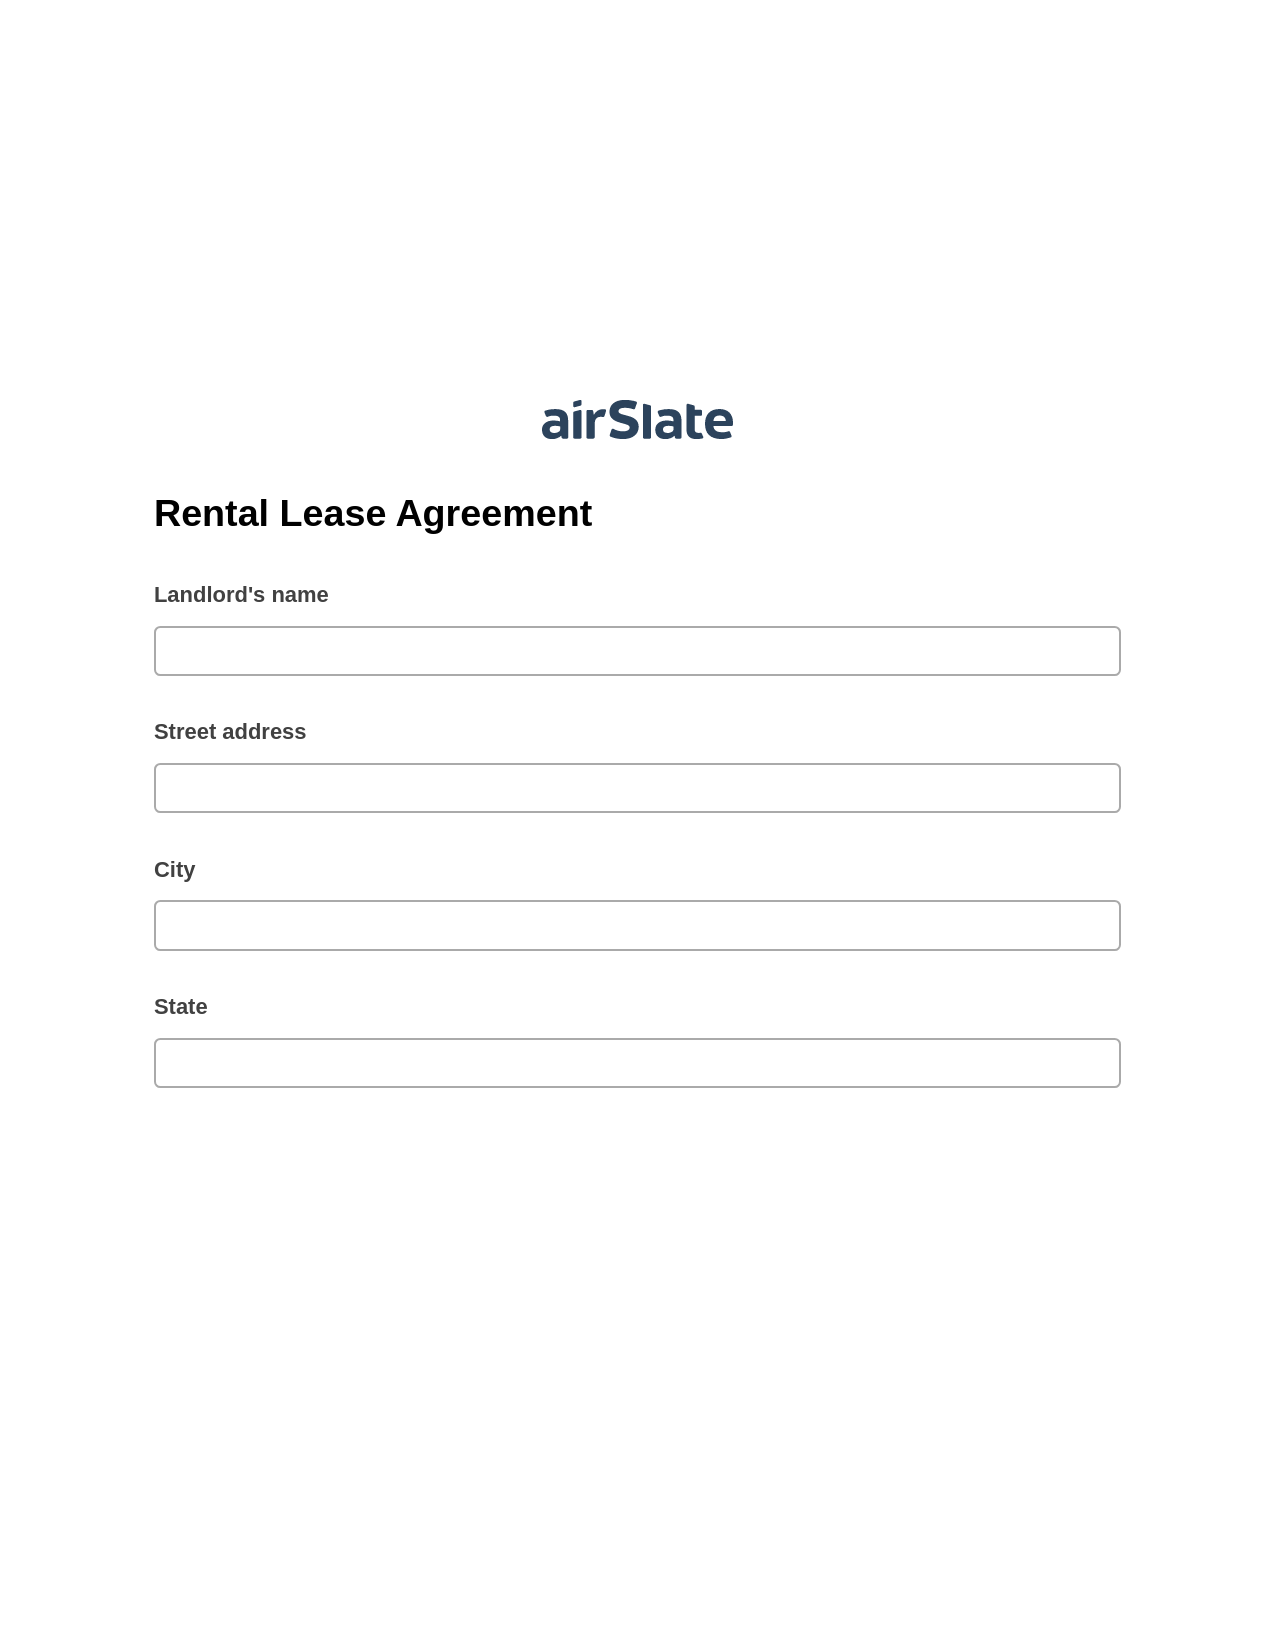 Rental Lease Agreement Pre-fill Slate from MS Dynamics 365 Records Bot, Create Salesforce Record Bot, OneDrive Bot